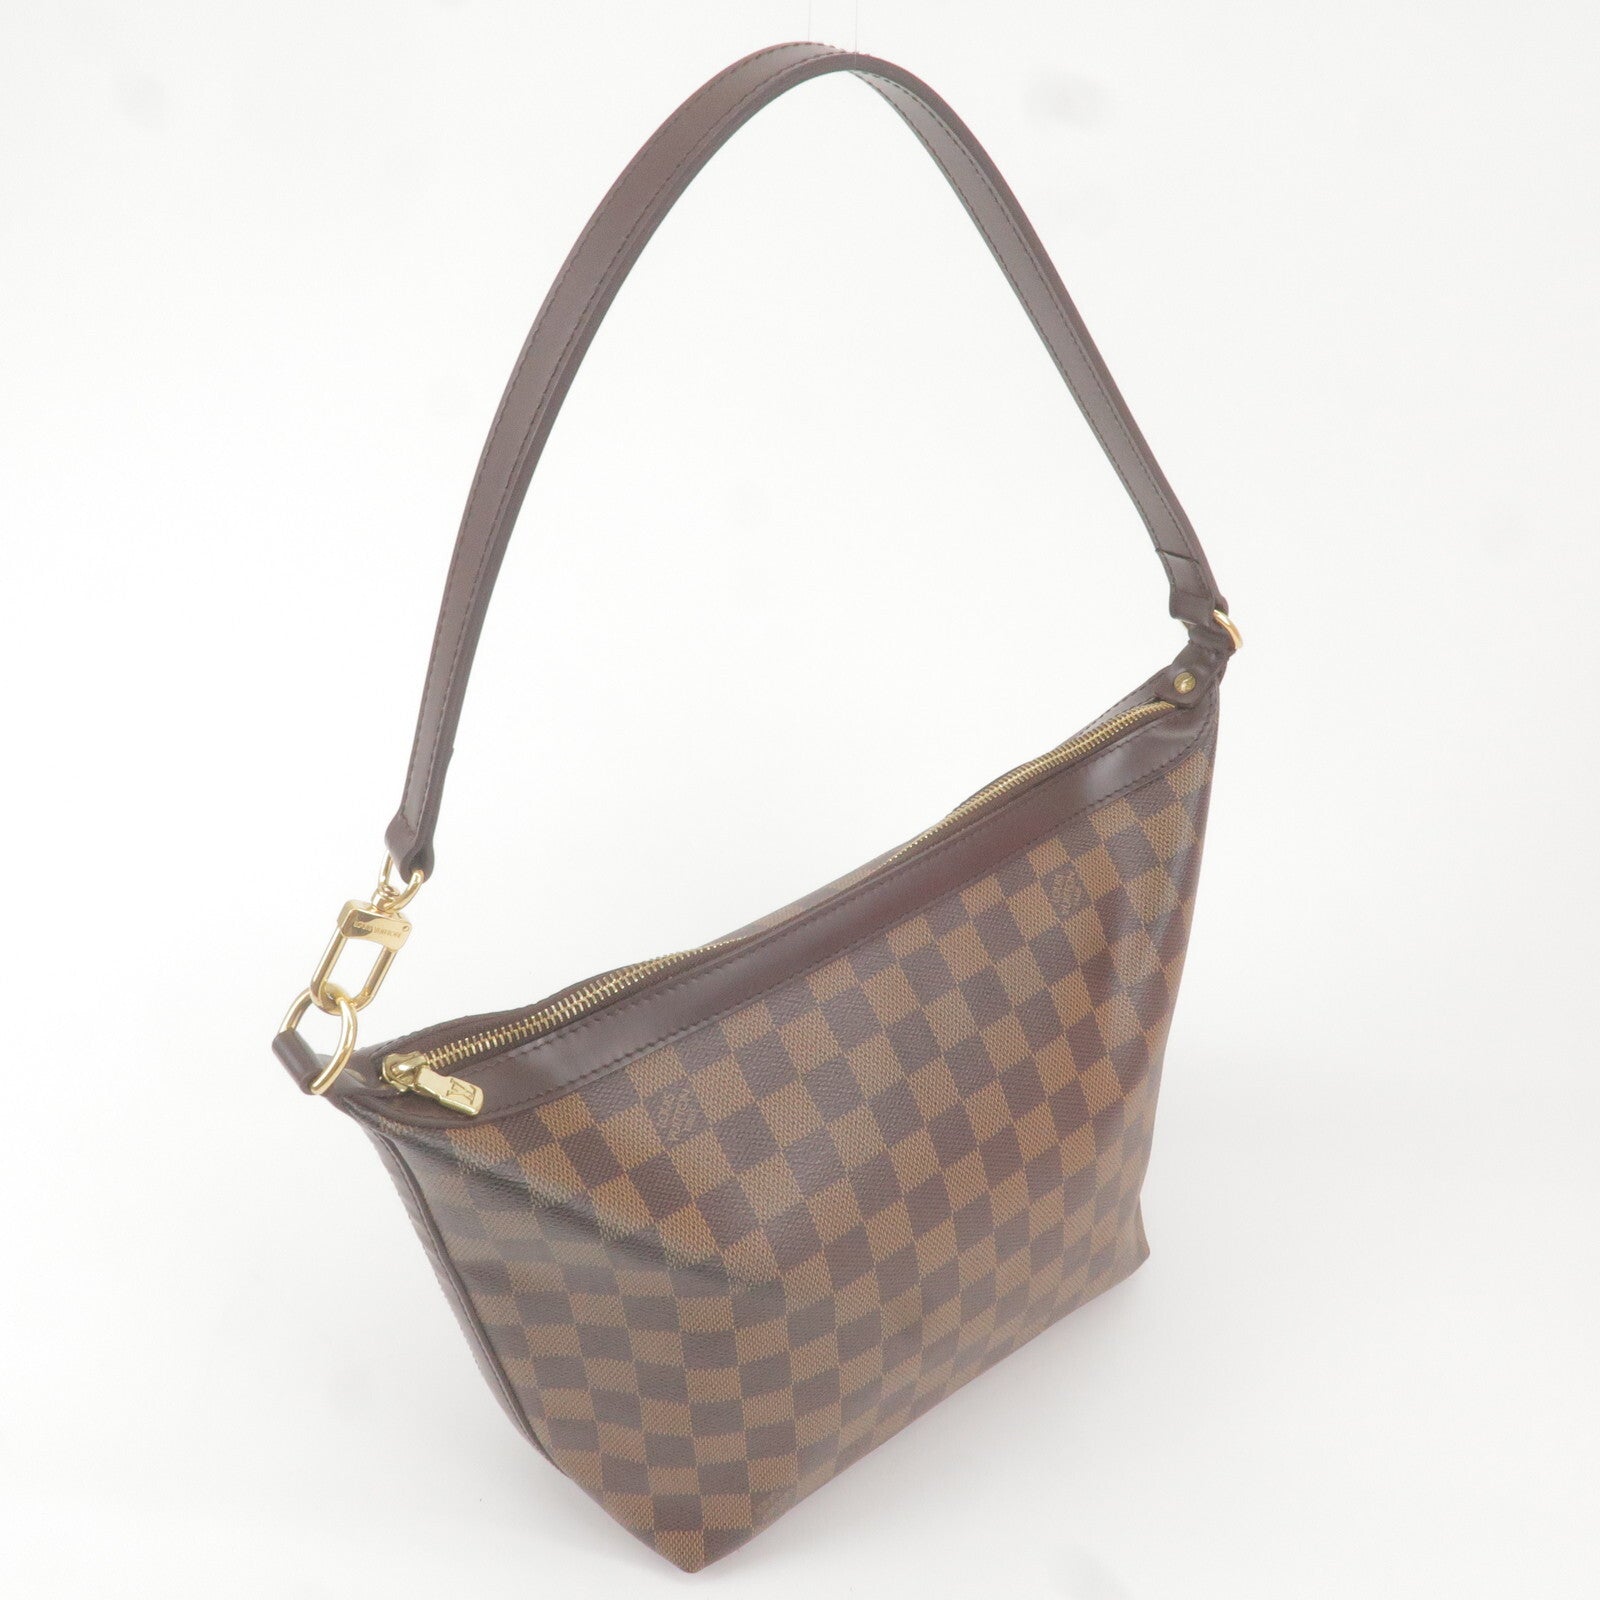 LOUIS VUITTON LV N51995 Damier Brown Leather Illovo MM Shoulder Bag Used